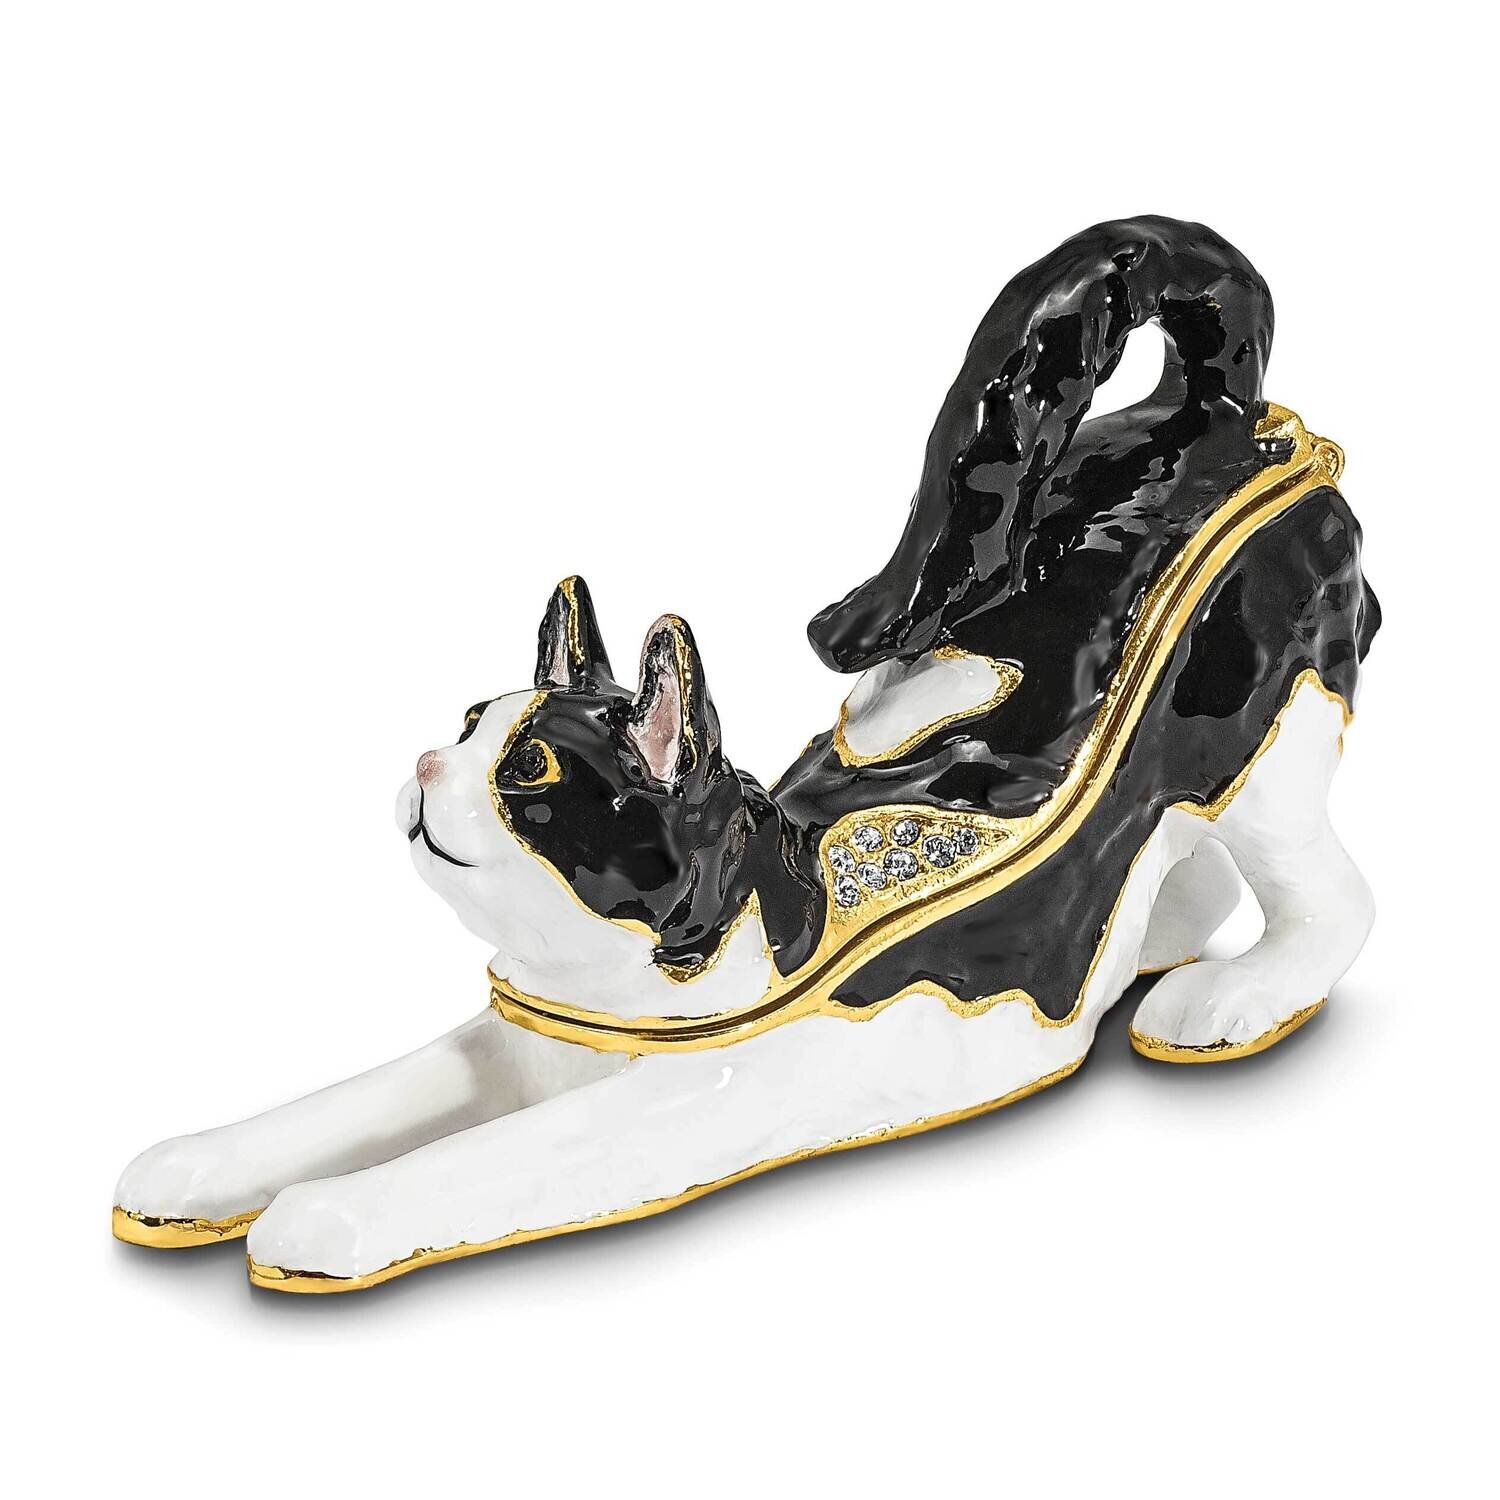 By Jere SLEEPY Stretching Black and White Cat Trinket Box with Matching 18 Inch Necklace Pewter Bejeweled Crystals Gold-tone Enameled BJ4107